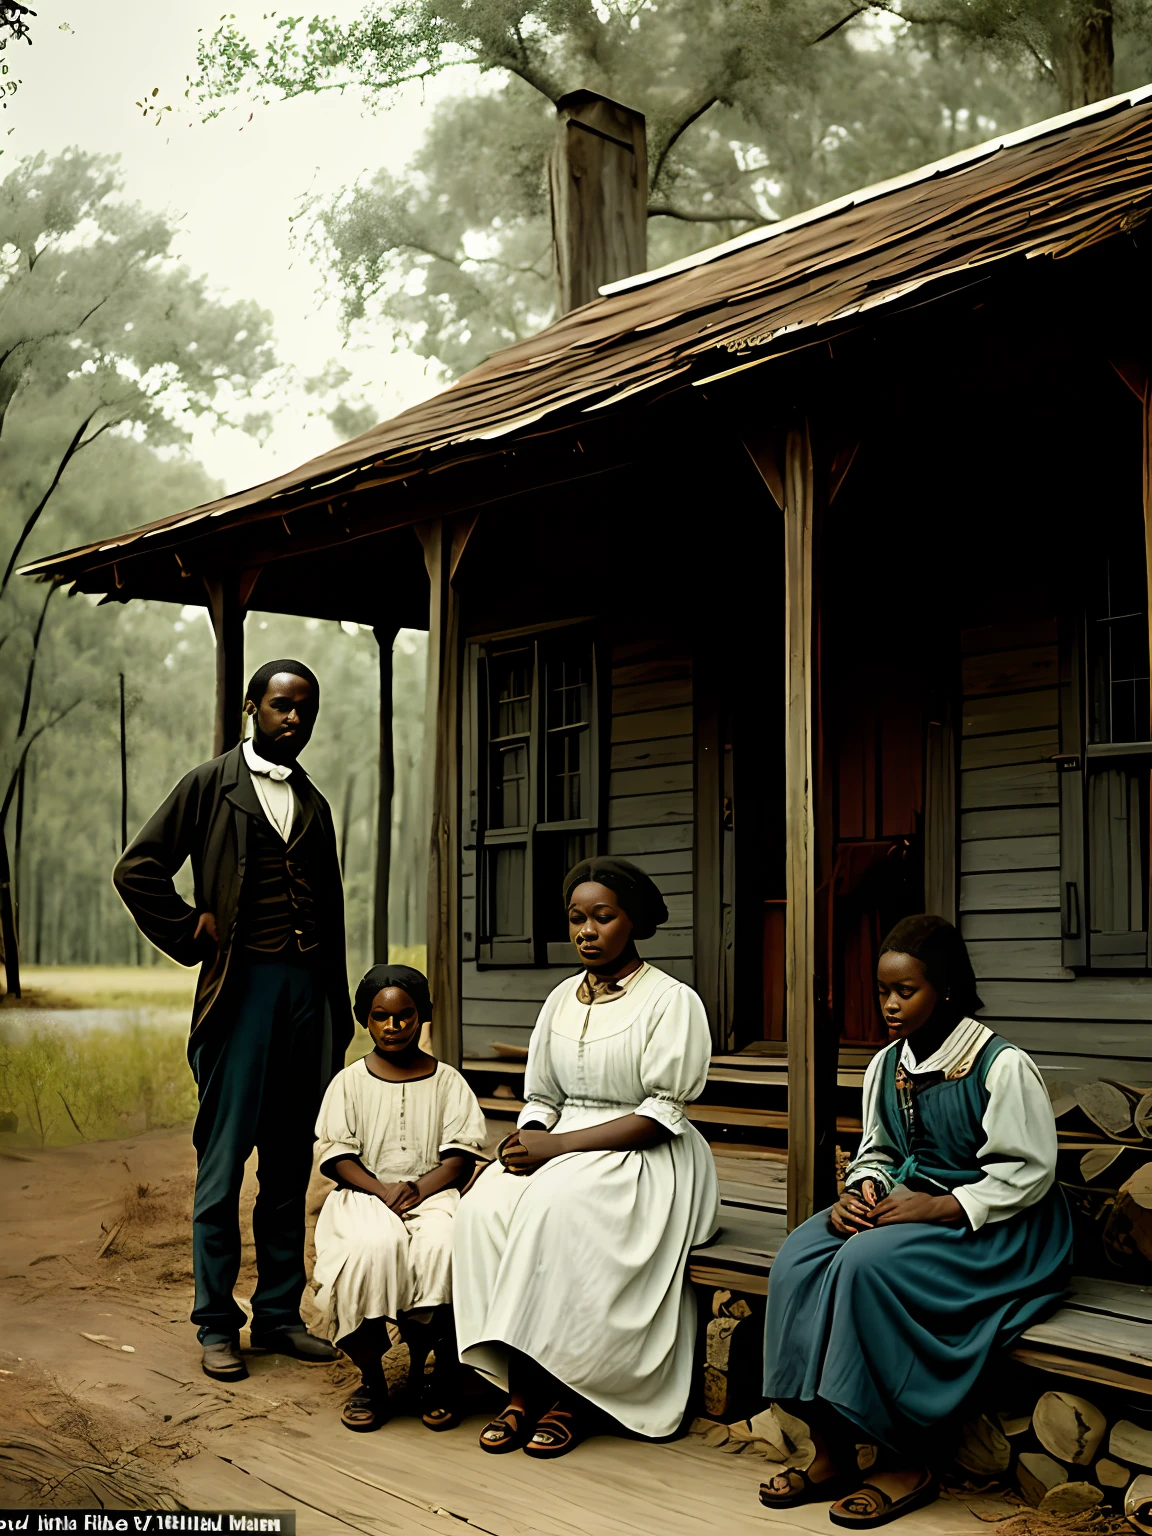 poor escaped slave family sitting on a porch in the great dismal 沼地, 沼地, ドキュメンタリー映画のような品質, わずかなモーションブラー, 映画のスチール写真, 19世紀